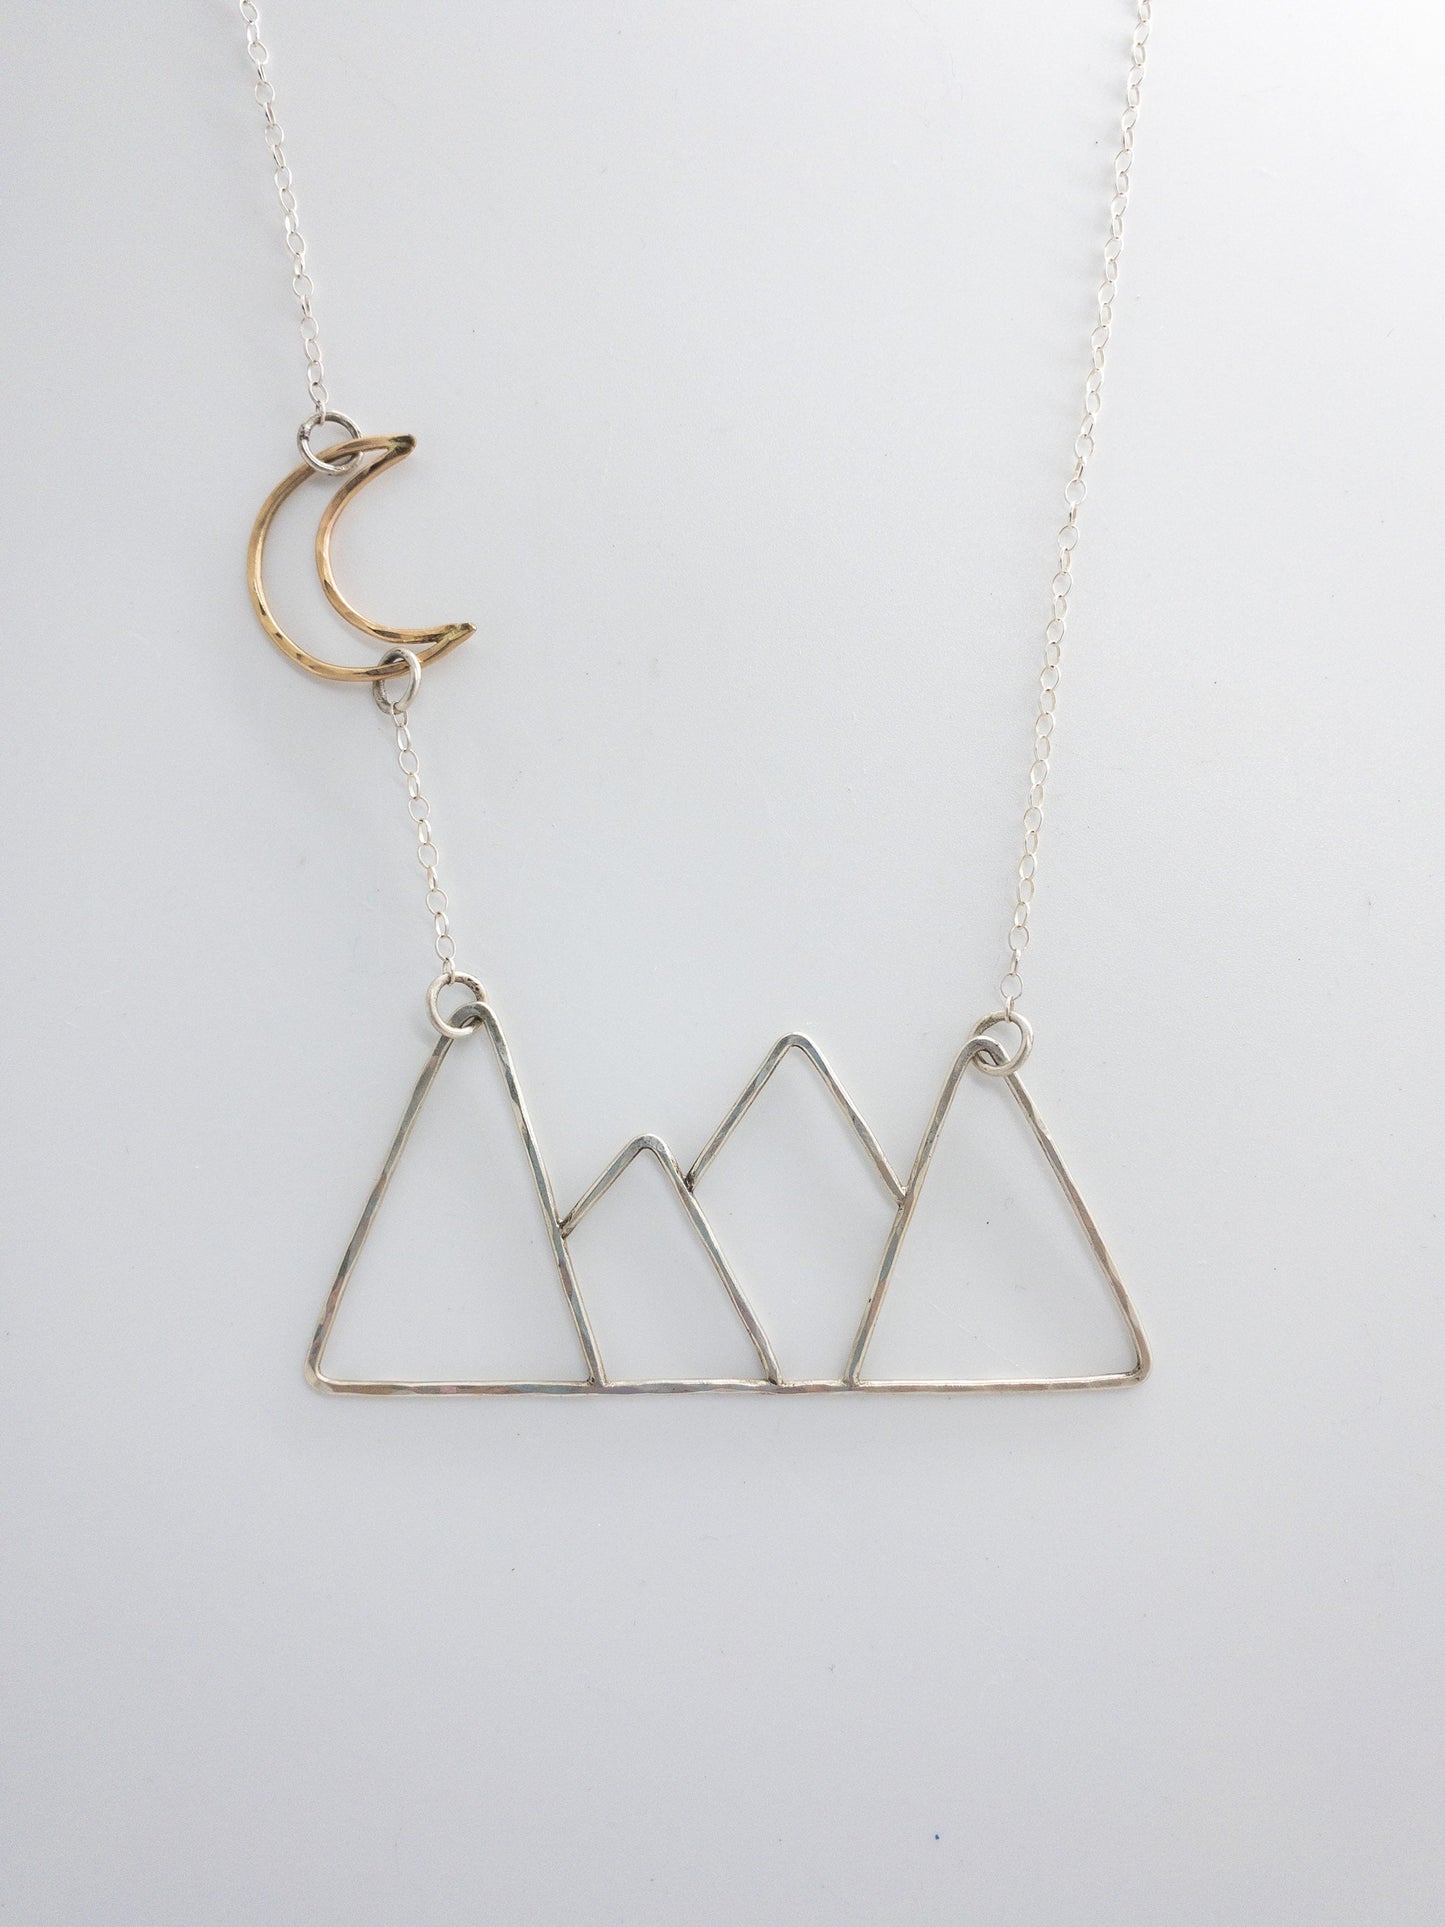 Mountains and Moon Sterling and 14 karat GF Necklace, Mountains Necklace, Gold Moon Jewelry, Mountains and Moon Necklace, Landscape Necklace